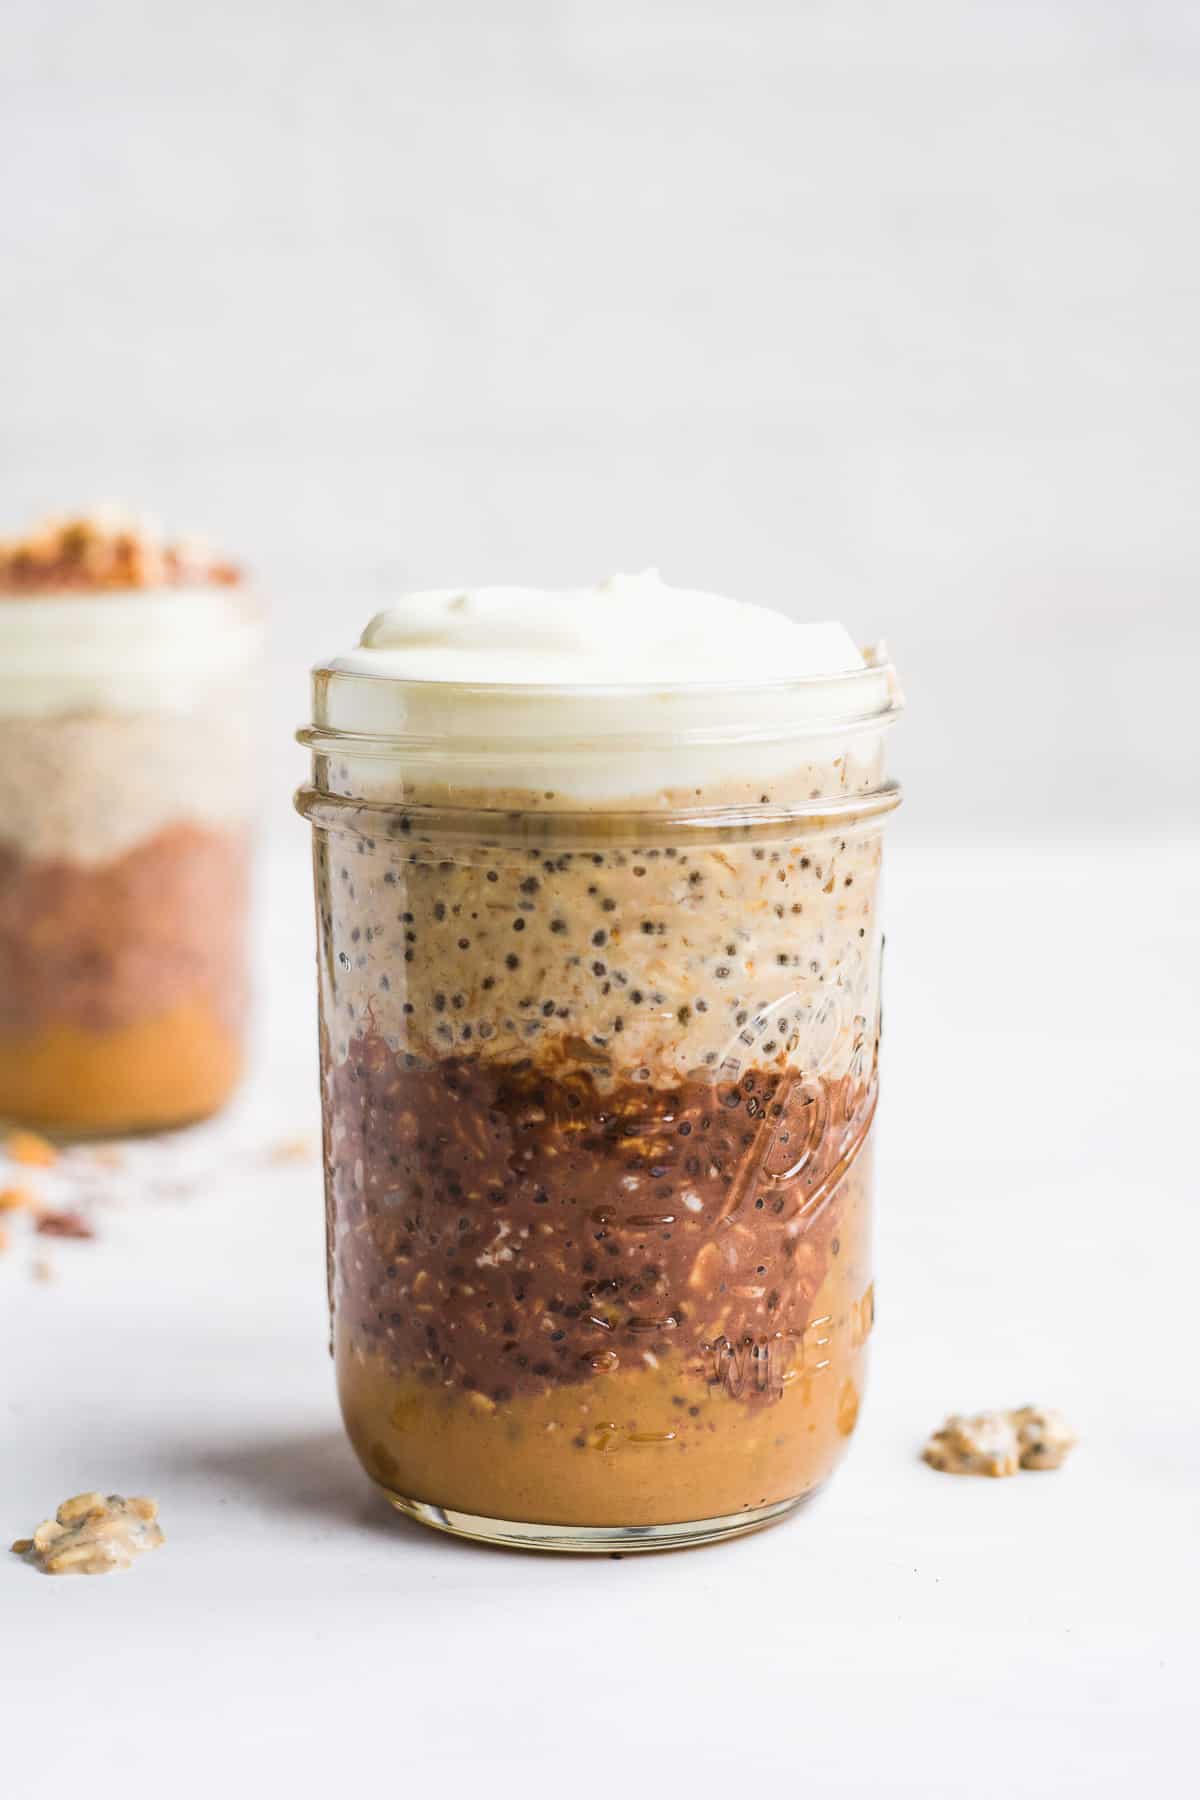 A jar with layers of oats and yogurt on top.